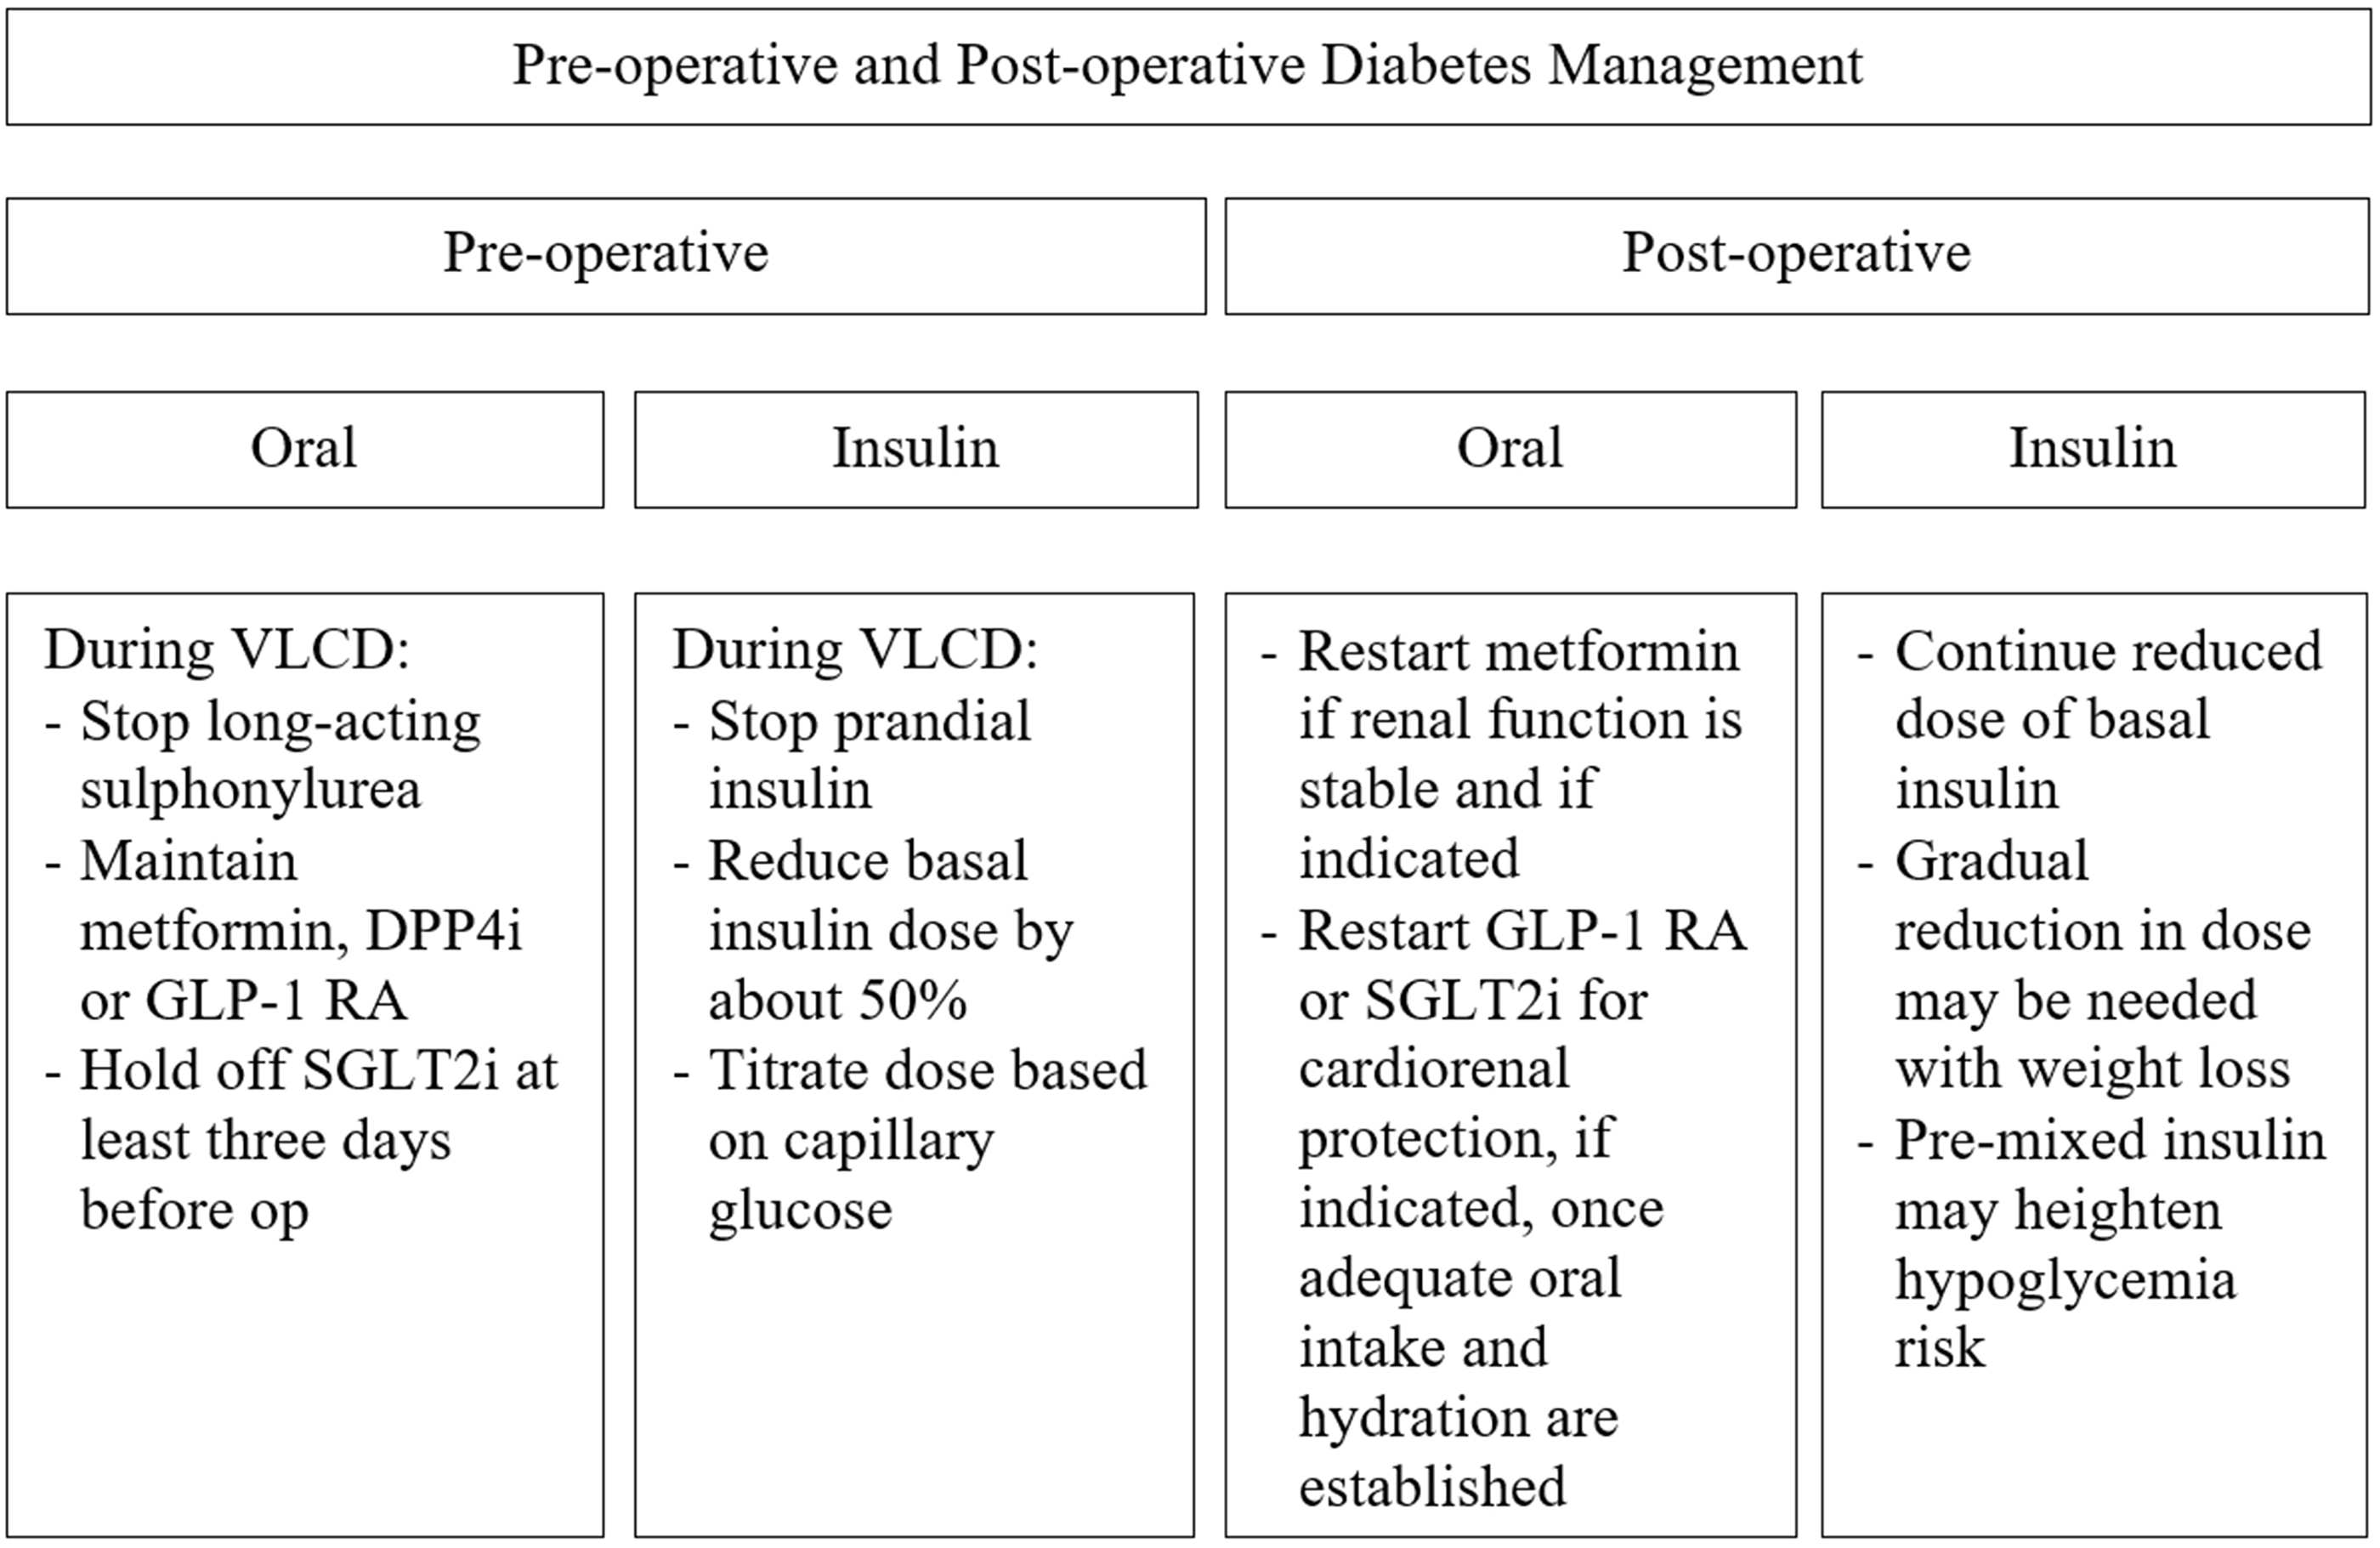 Management of type 2 diabetes after metabolic bariatric surgery